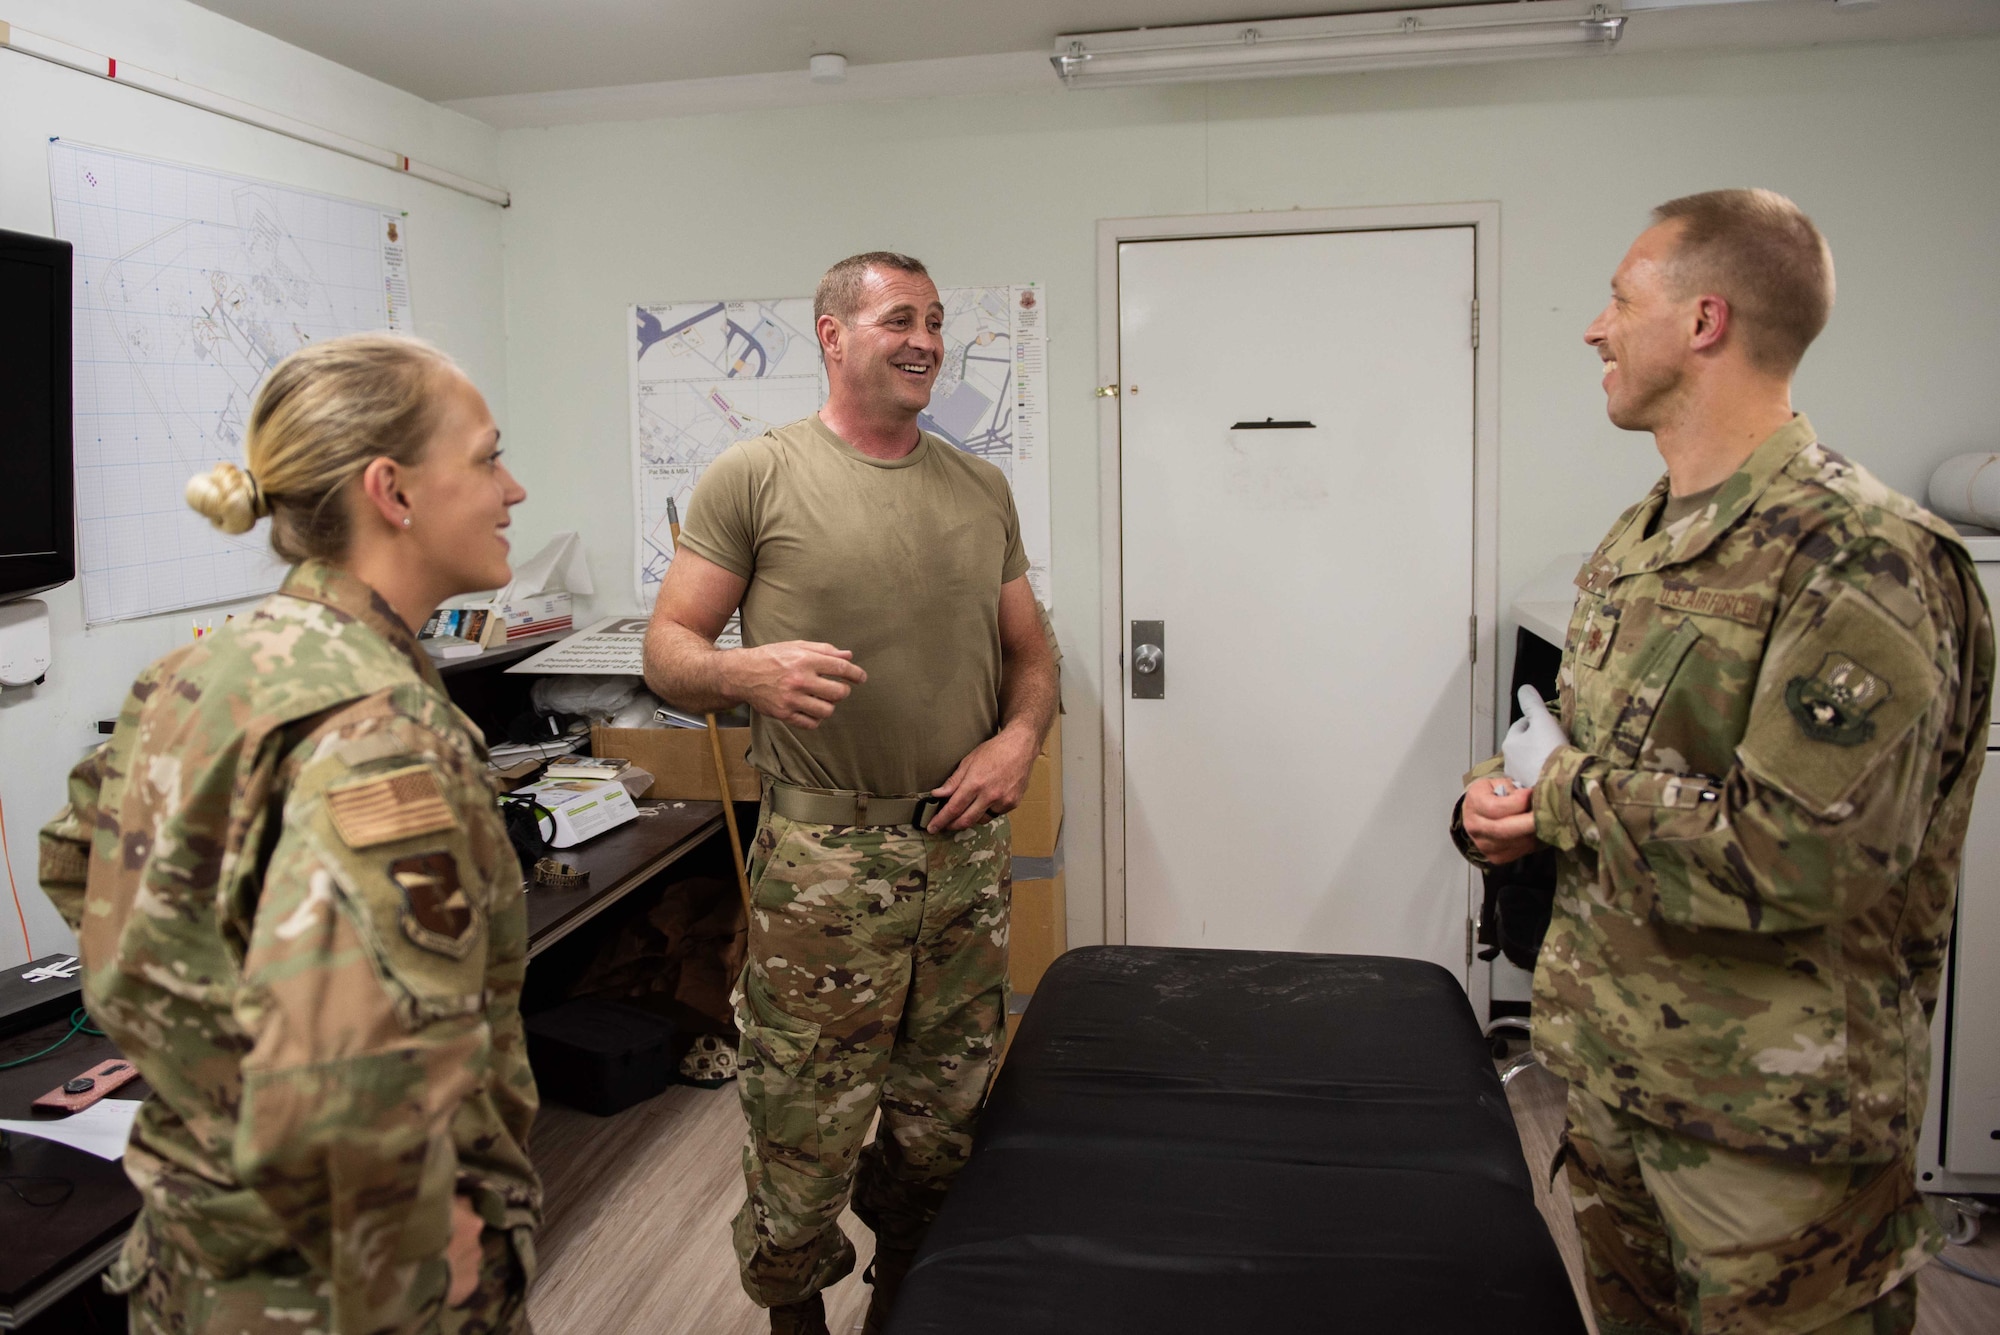 The 380th Expeditionary Medical Group physical therapist team talk to a patient after a treatment May 17, 2019 at Al Dhafra Air Base, United Arab Emirates. The team of two performs treatments for pain relief and then educates patients in injury prevention. (U.S. Air Force photo by Staff Sgt. Chris Thornbury)